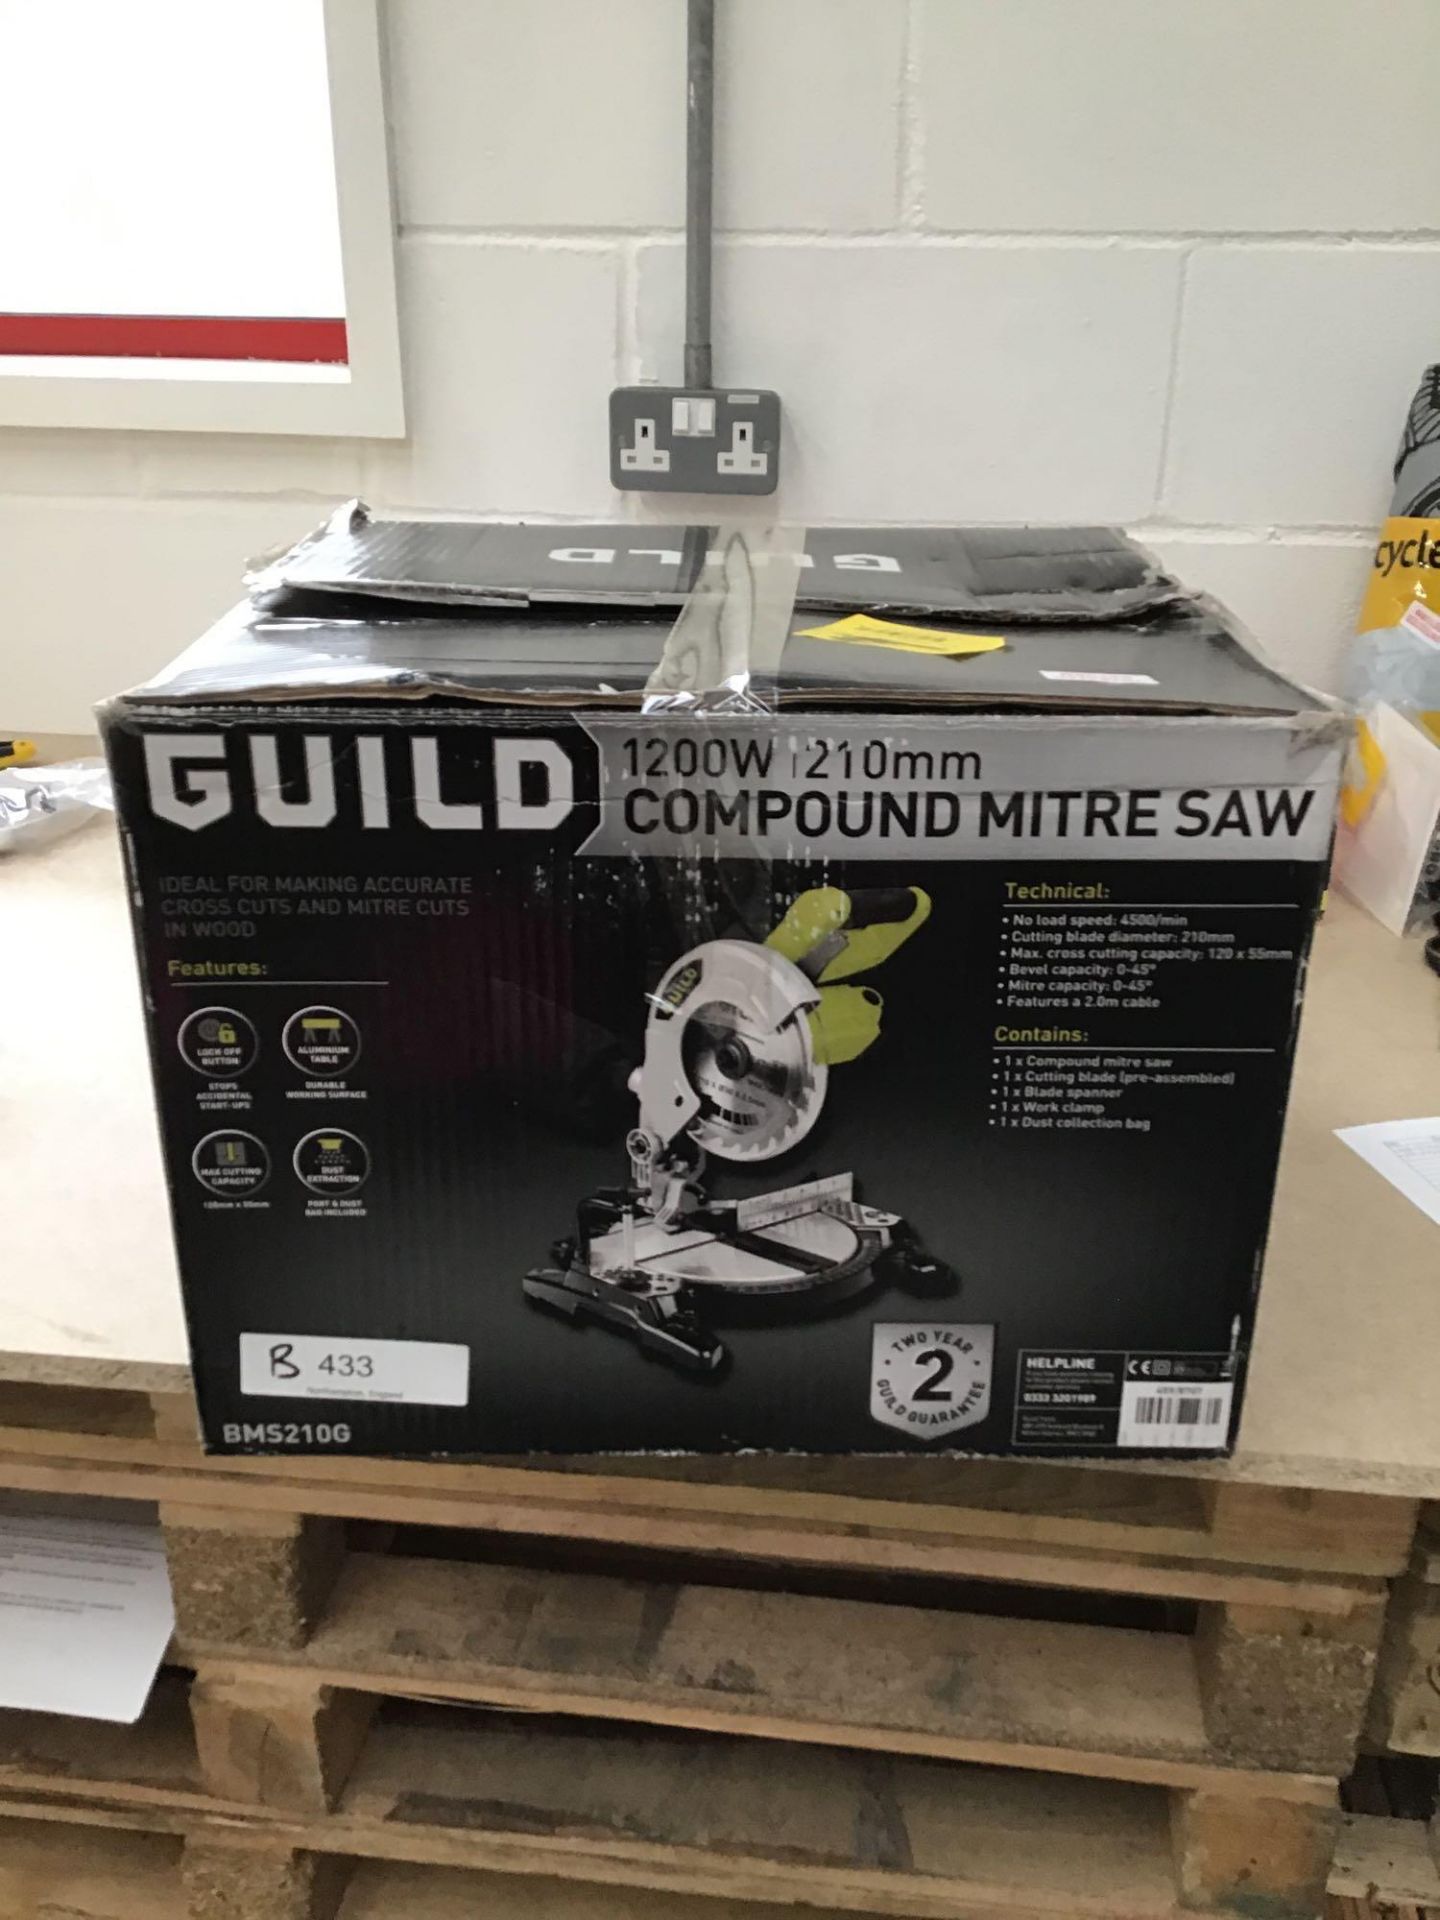 Guild 210mm Compound Mitre Saw - 1200W 459/8707 £70.00 RRP - Image 4 of 5